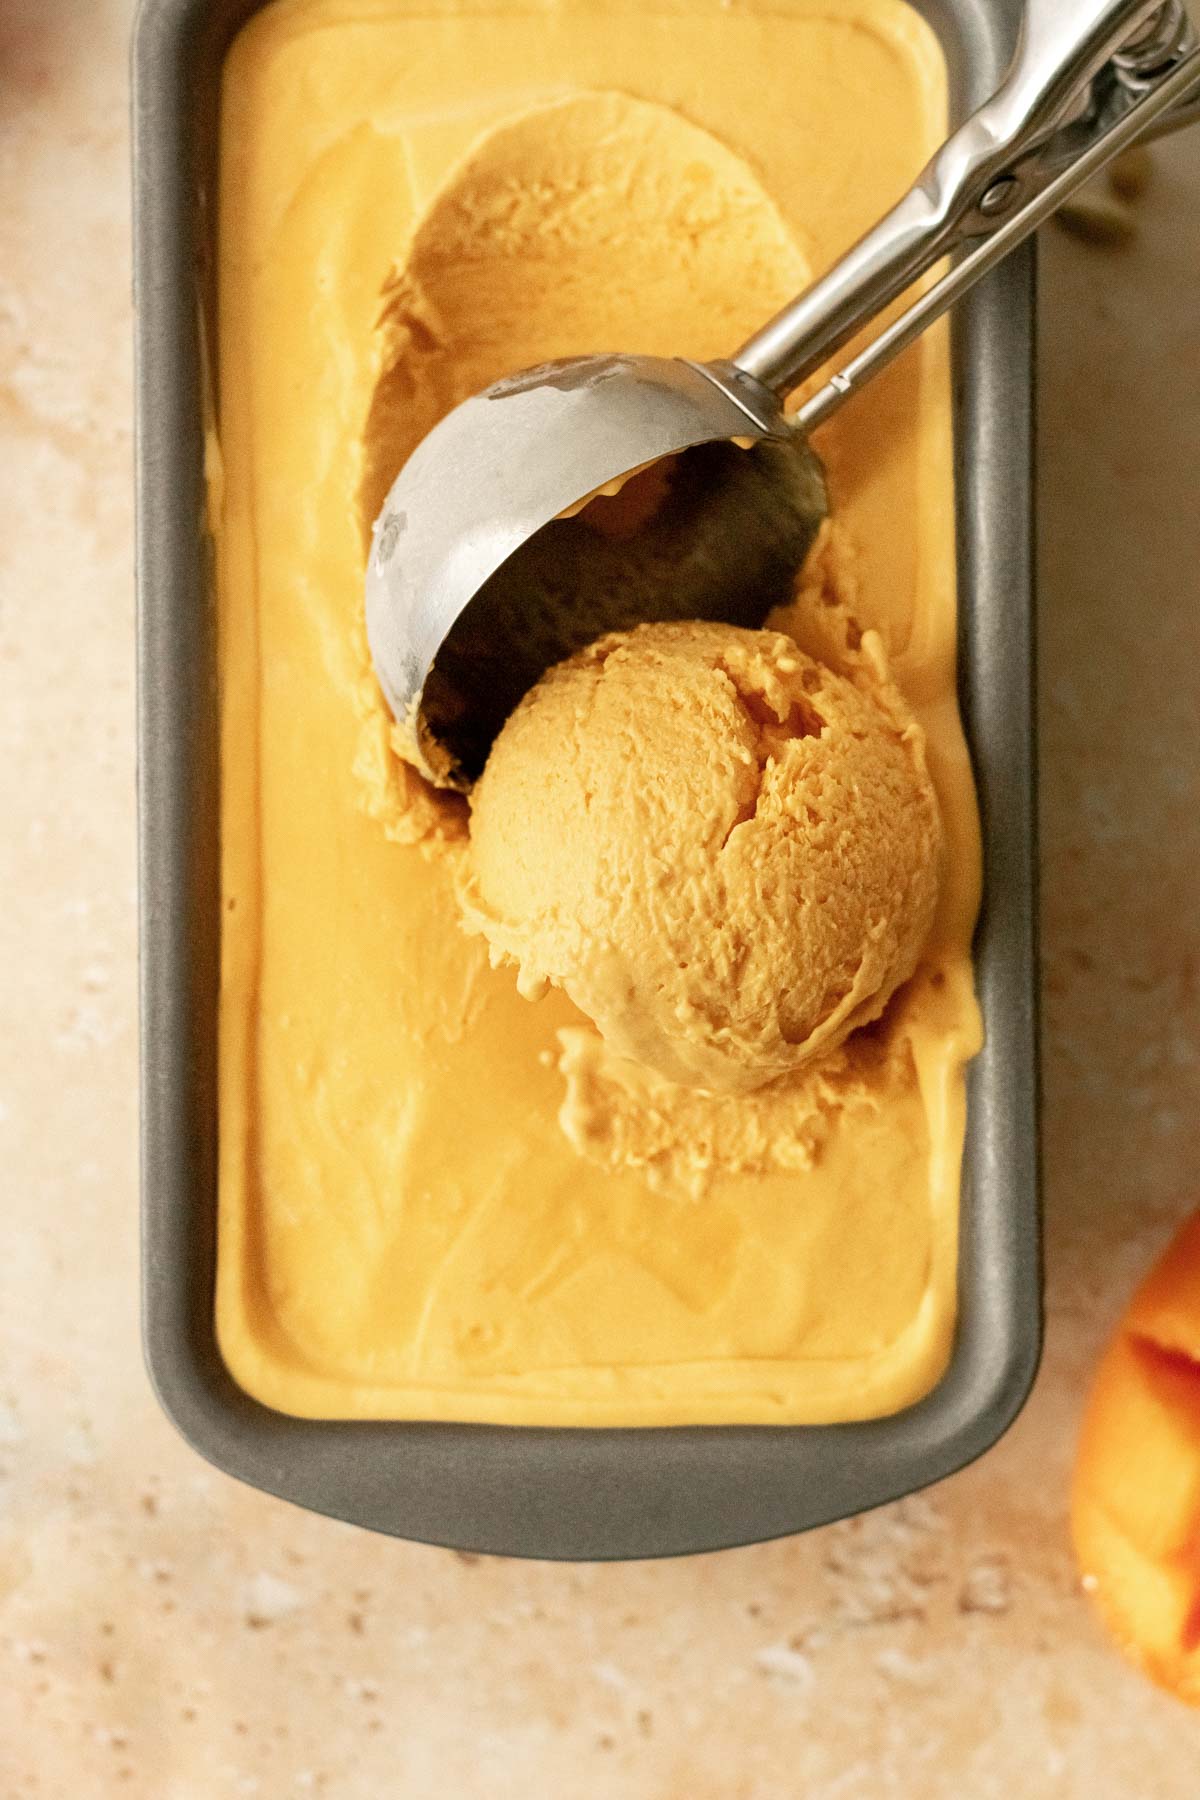 mango ice cream being scooped with an ice cream scoop